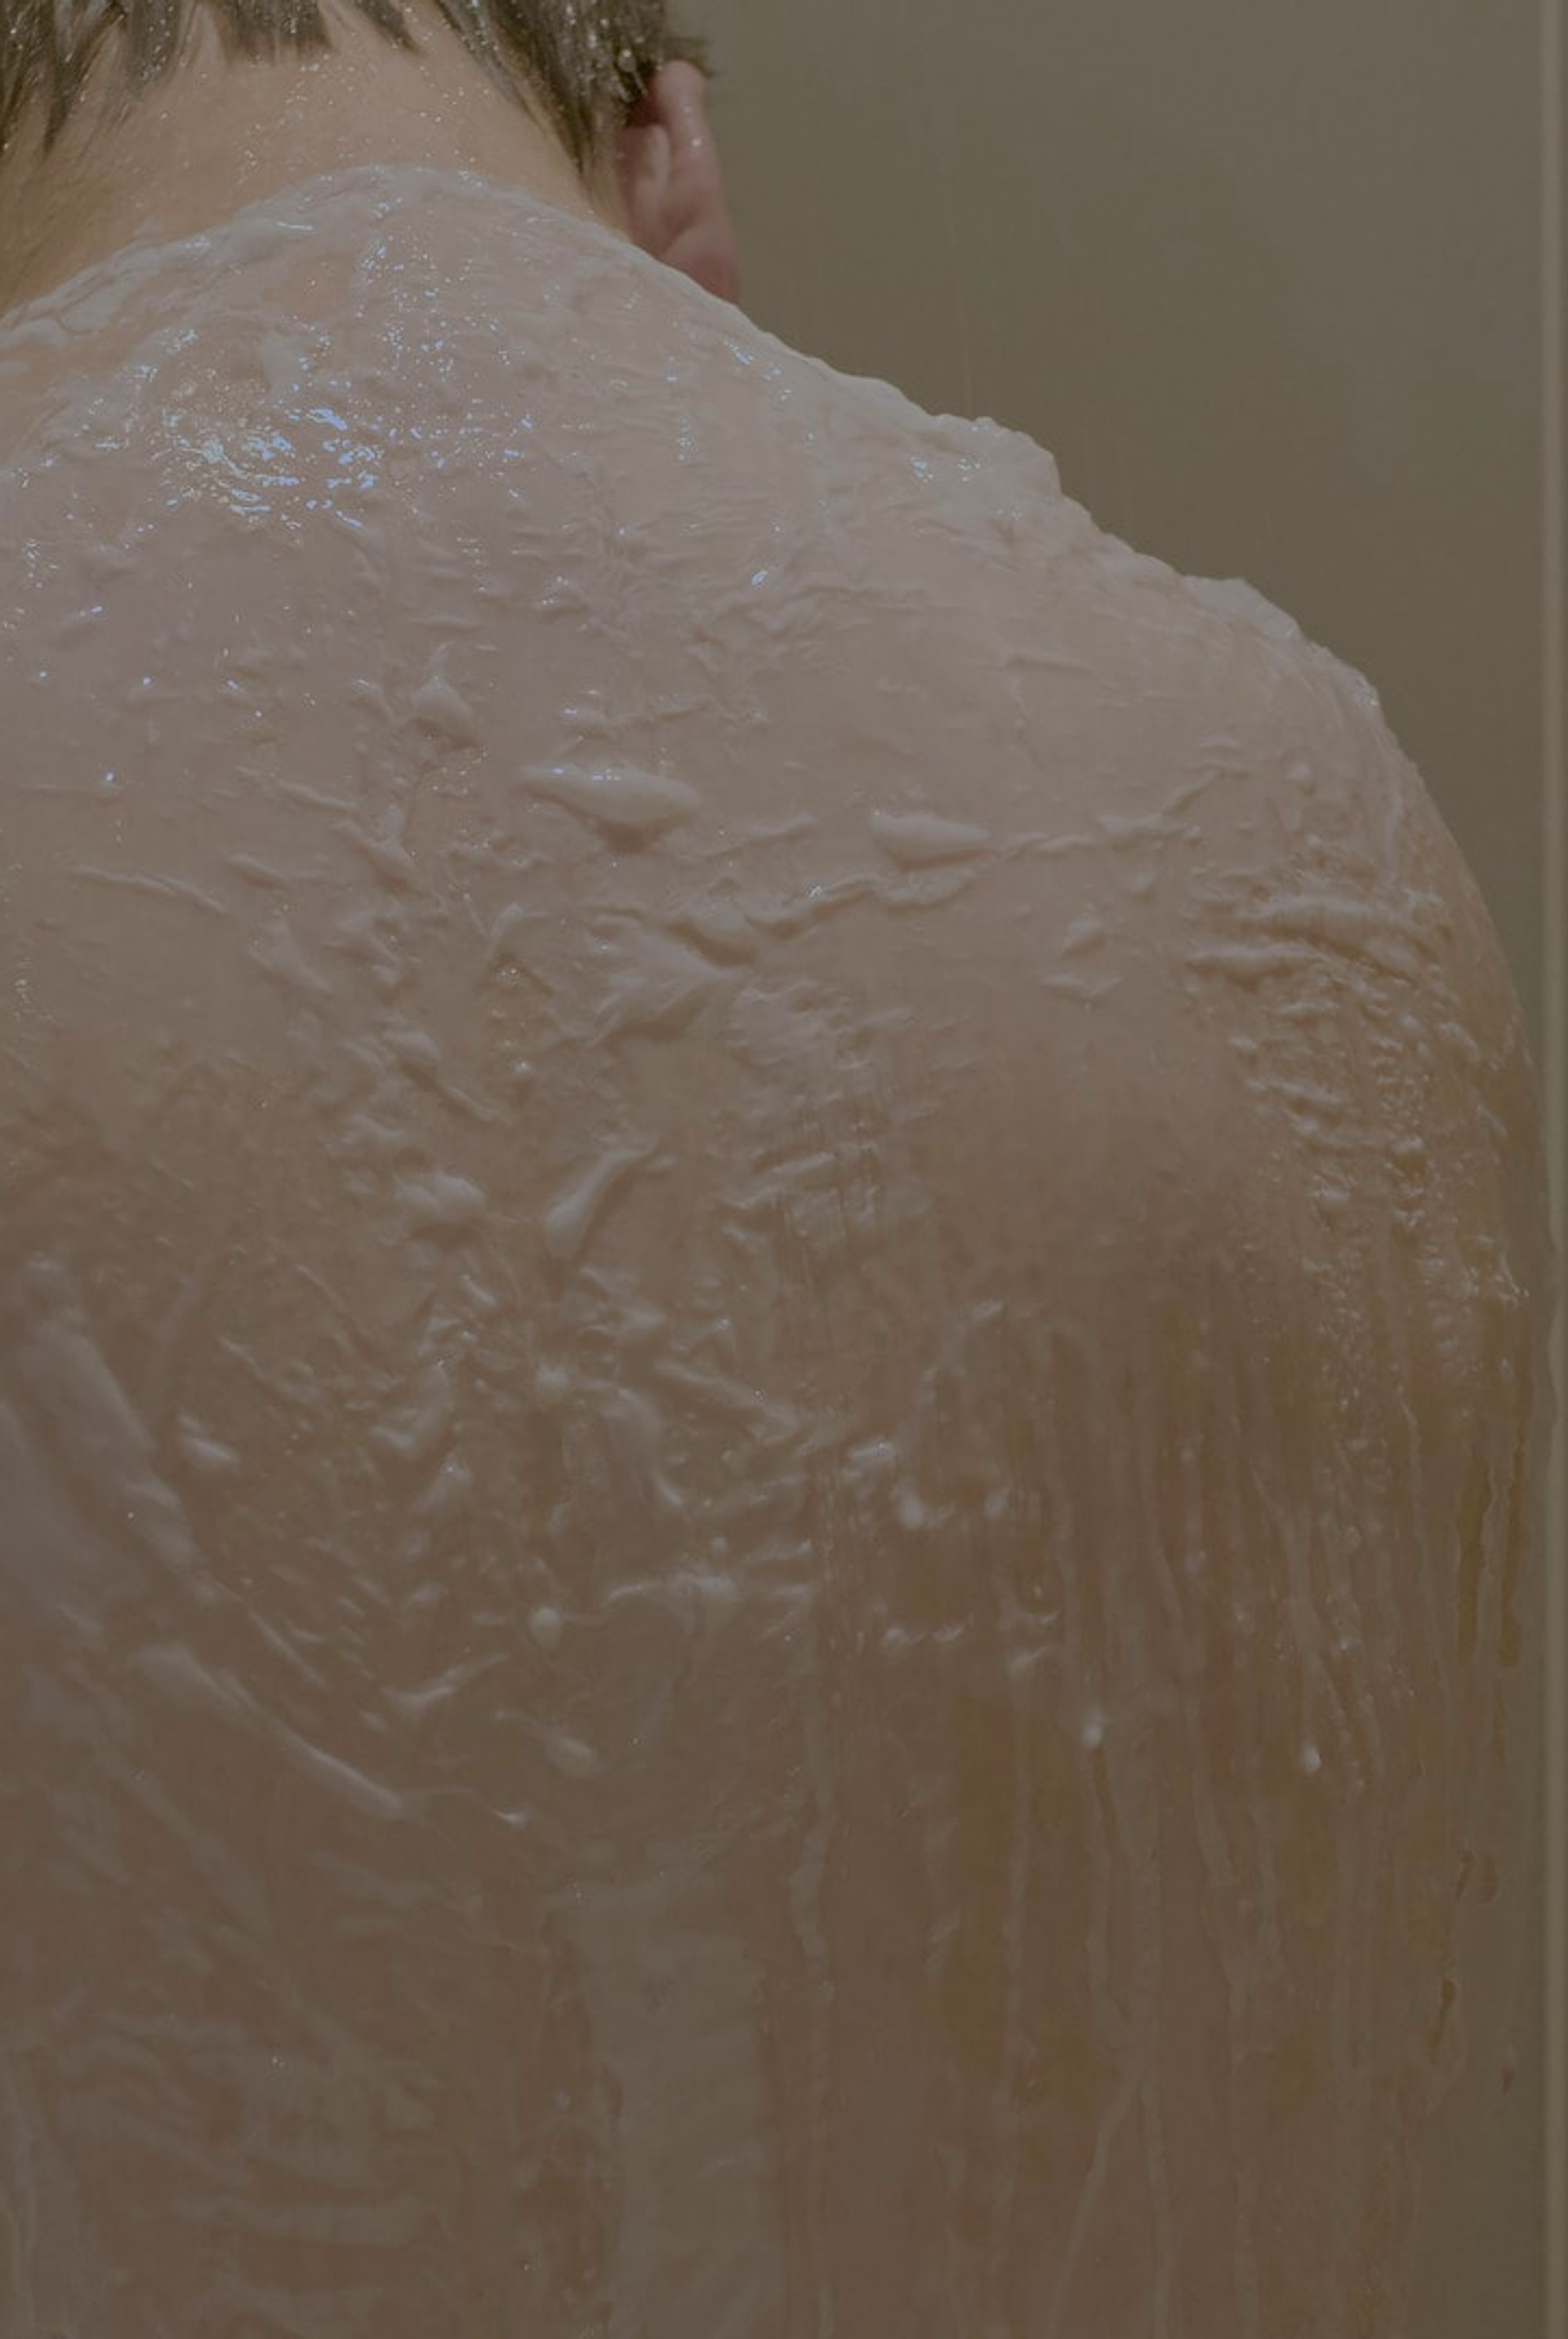 Image of a person with their back to the camera, their head bowed, and their back and upper arms covered in a veil of white soapy foam. By Joe Zijian Zhou